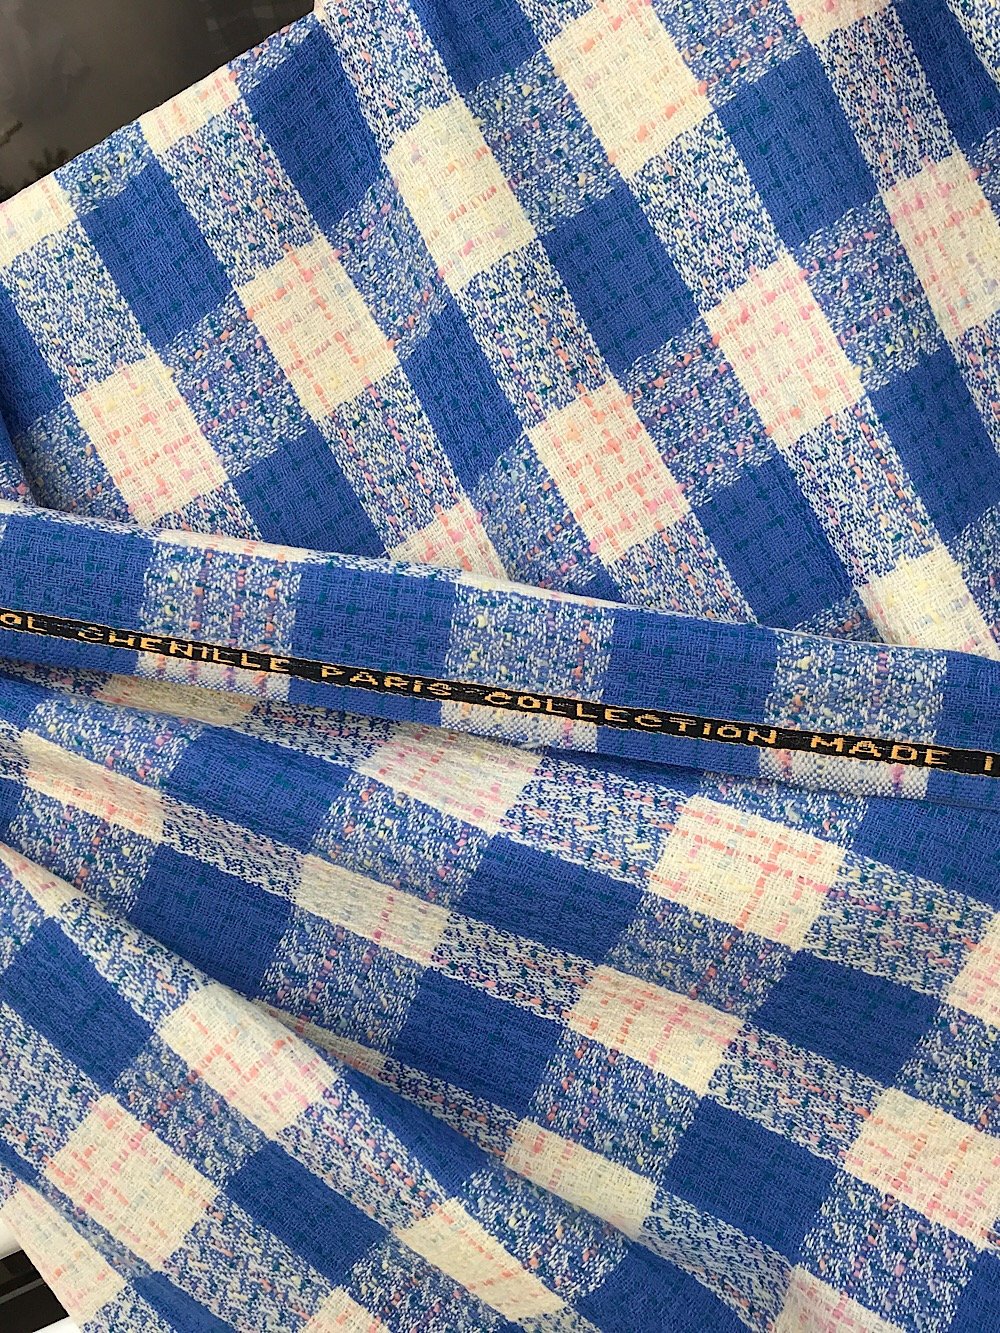 blue white pink large check wool fabric, tartan plaid, fancy wool suiting, skirt, jacket coat fabric pure wool